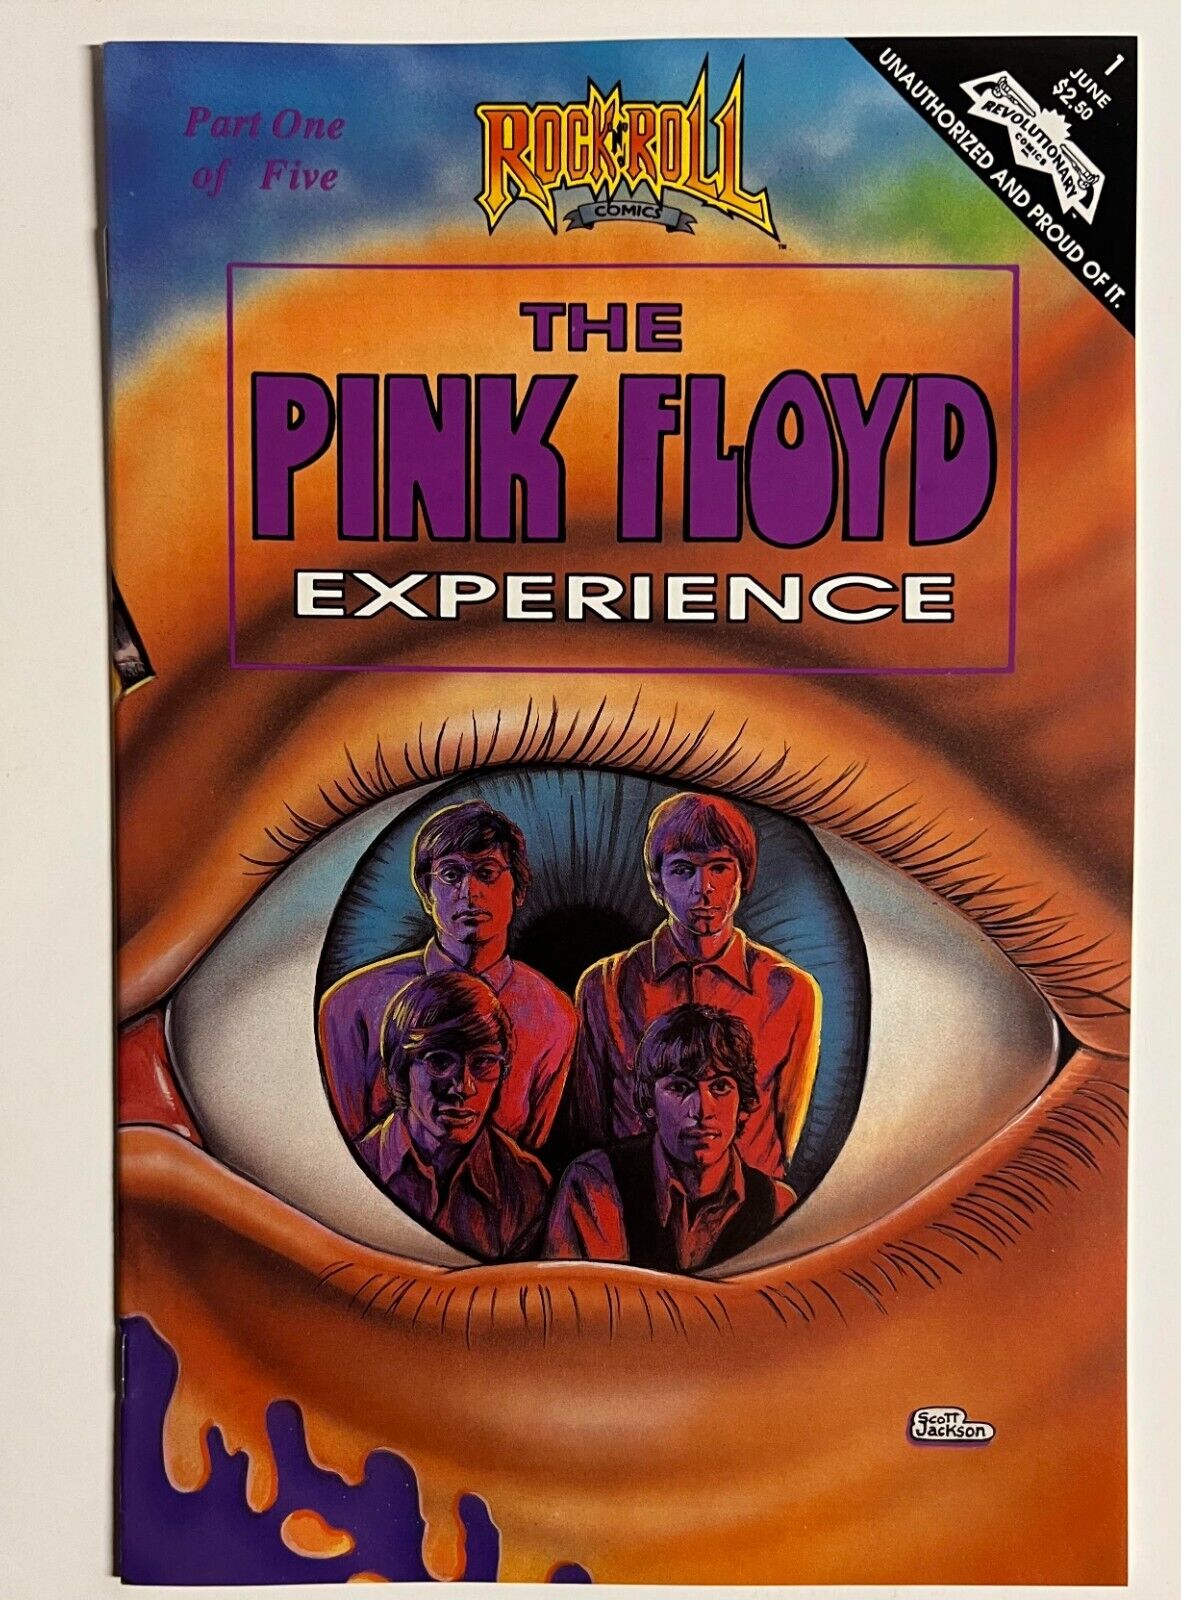 Rock & Roll Comics - The Pink Floyd Experience Part One (1991)